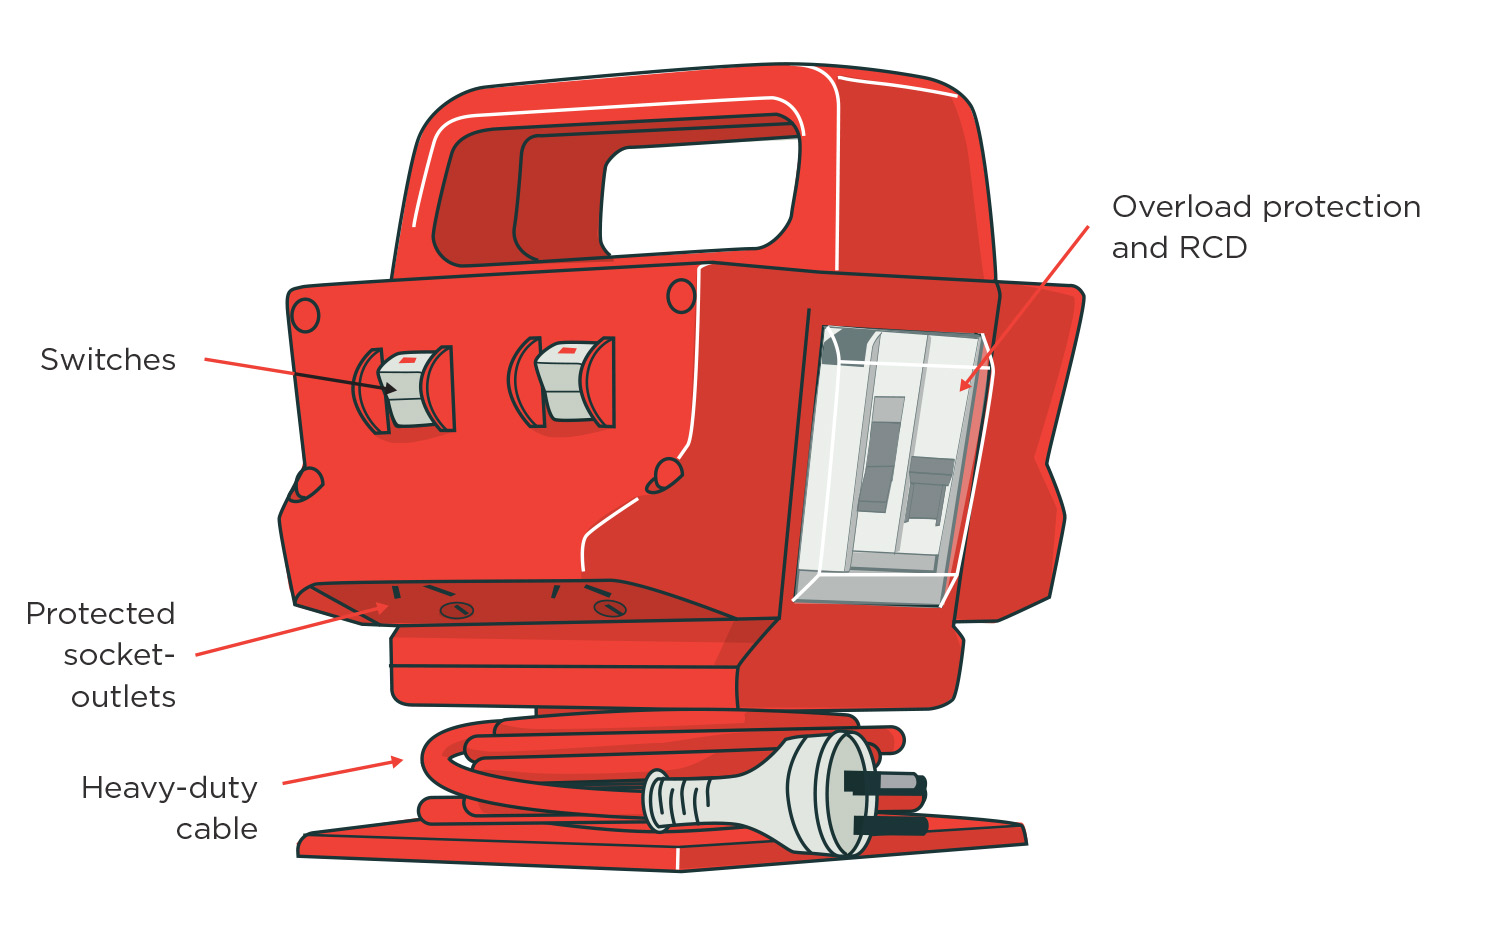 [Image] Red PSOA unit showing carry handle, power cord, plug and base with labels and red arrows pointing to all components. 